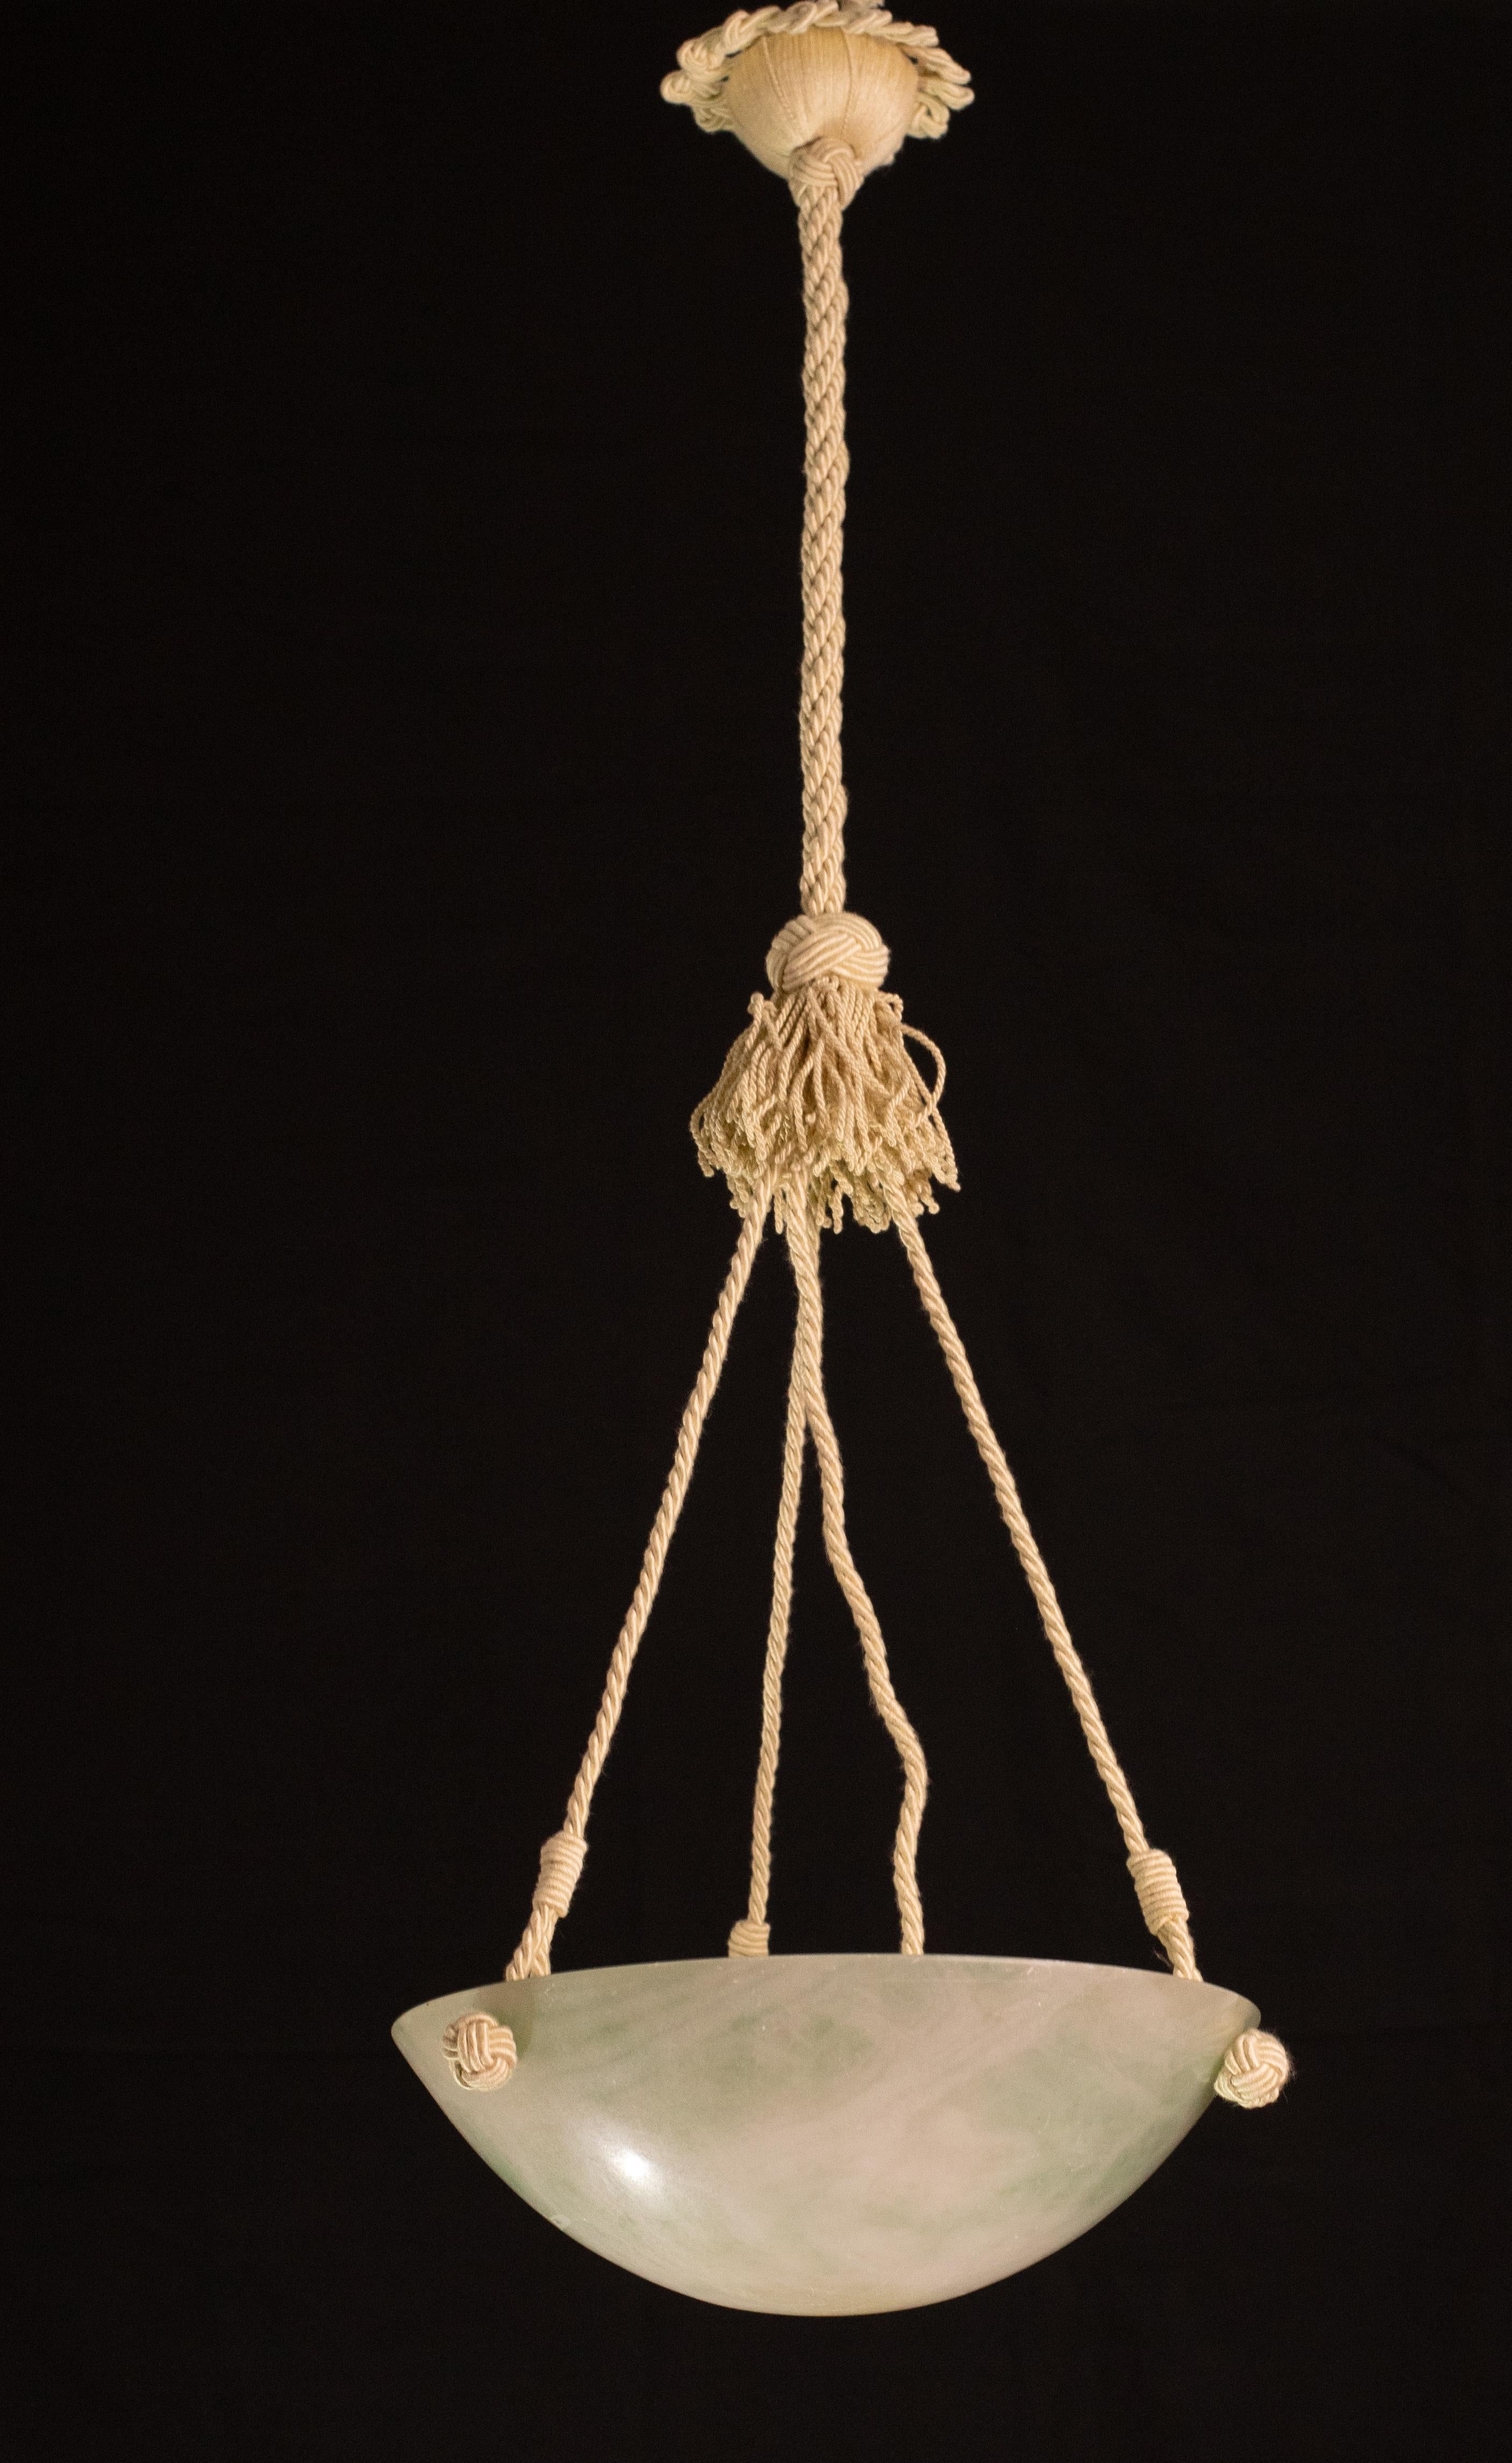 Antique alabaster hanging lamp in Art Deco style, circa 1940s, in rare green stone.
A single piece of alabaster, beautifully worked with hues and reflections of other colours when lit, suspended from three fabric ropes.
The stone is original